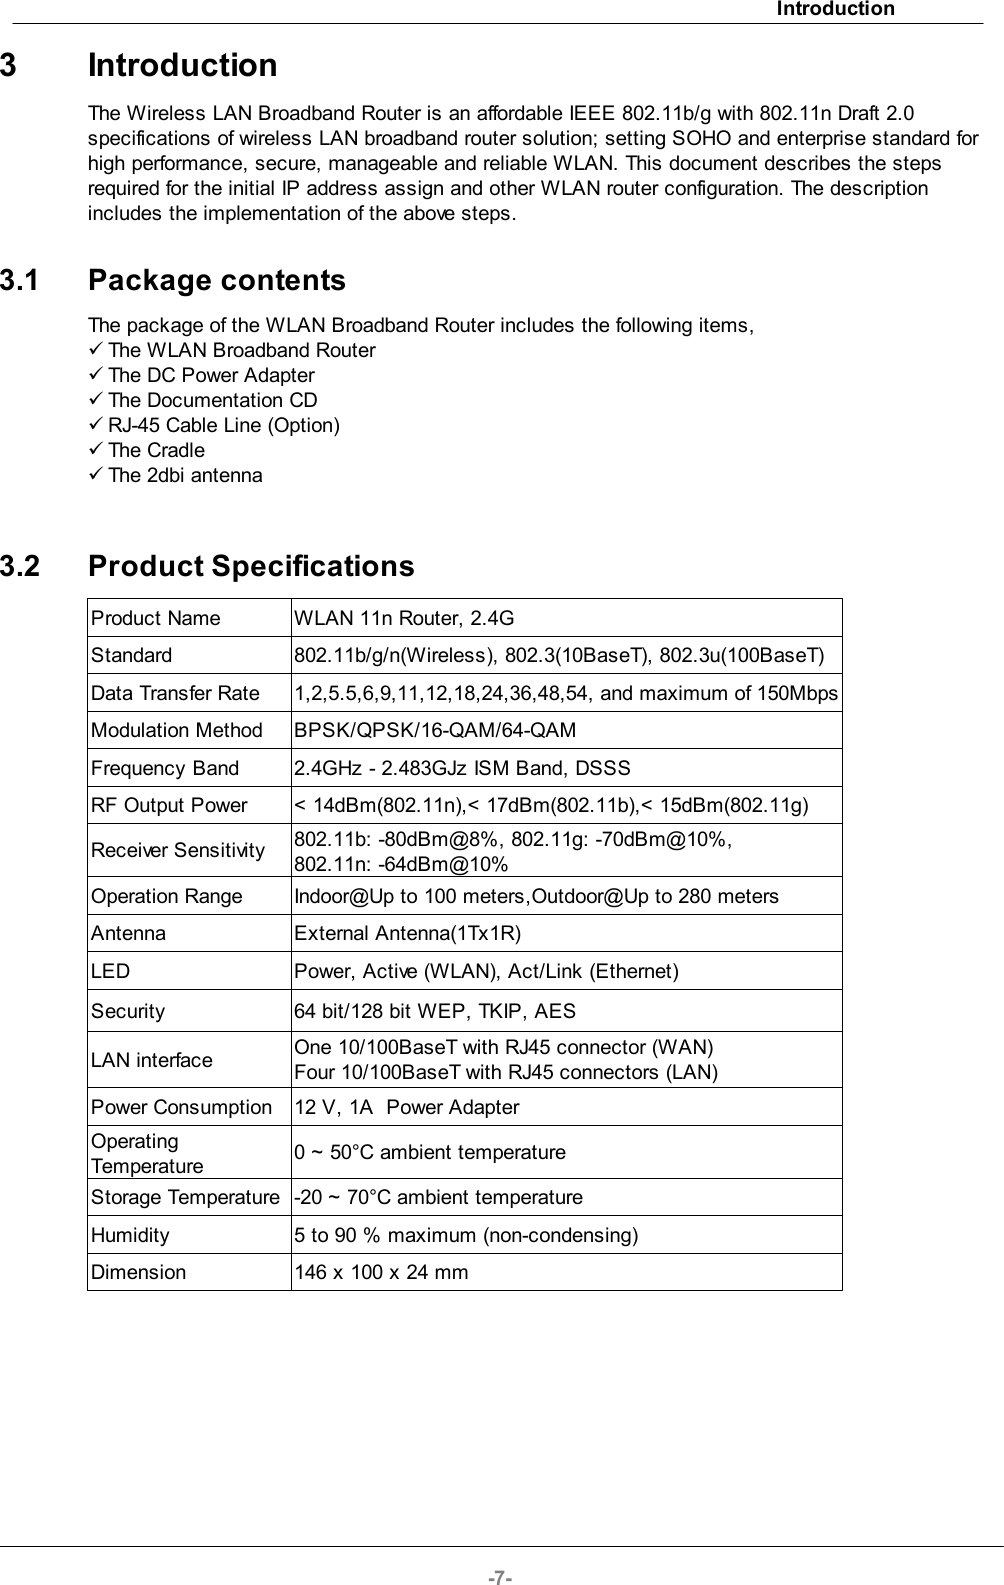 Introduction-7-3 IntroductionThe Wireless LAN Broadband Router is an affordable IEEE 802.11b/g with 802.11n Draft 2.0specifications of wireless LAN broadband router solution; setting SOHO and enterprise standard forhigh performance, secure, manageable and reliable WLAN. This document describes the stepsrequired for the initial IP address assign and other WLAN router configuration. The descriptionincludes the implementation of the above steps.3.1 Package contentsThe package of the WLAN Broadband Router includes the following items,üThe WLAN Broadband RouterüThe DC Power AdapterüThe Documentation CDüRJ-45 Cable Line (Option)üThe CradleüThe 2dbi antenna3.2 Product SpecificationsProduct NameWLAN 11n Router, 2.4GStandard802.11b/g/n(Wireless), 802.3(10BaseT), 802.3u(100BaseT) Data Transfer Rate1,2,5.5,6,9,11,12,18,24,36,48,54, and maximum of 150MbpsModulation MethodBPSK/QPSK/16-QAM/64-QAM Frequency Band2.4GHz - 2.483GJz ISM Band, DSSSRF Output Power&lt; 14dBm(802.11n),&lt; 17dBm(802.11b),&lt; 15dBm(802.11g) Receiver Sensitivity802.11b: -80dBm@8%, 802.11g: -70dBm@10%, 802.11n: -64dBm@10%Operation RangeIndoor@Up to 100 meters,Outdoor@Up to 280 meters AntennaExternal Antenna(1Tx1R)LEDPower, Active (WLAN), Act/Link (Ethernet)Security64 bit/128 bit WEP, TKIP, AESLAN interfaceOne 10/100BaseT with RJ45 connector (WAN)Four 10/100BaseT with RJ45 connectors (LAN)Power Consumption12 V, 1A  Power AdapterOperatingTemperature0 ~ 50°C ambient temperatureStorage Temperature-20 ~ 70°C ambient temperatureHumidity5 to 90 % maximum (non-condensing)Dimension146 x 100 x 24 mm